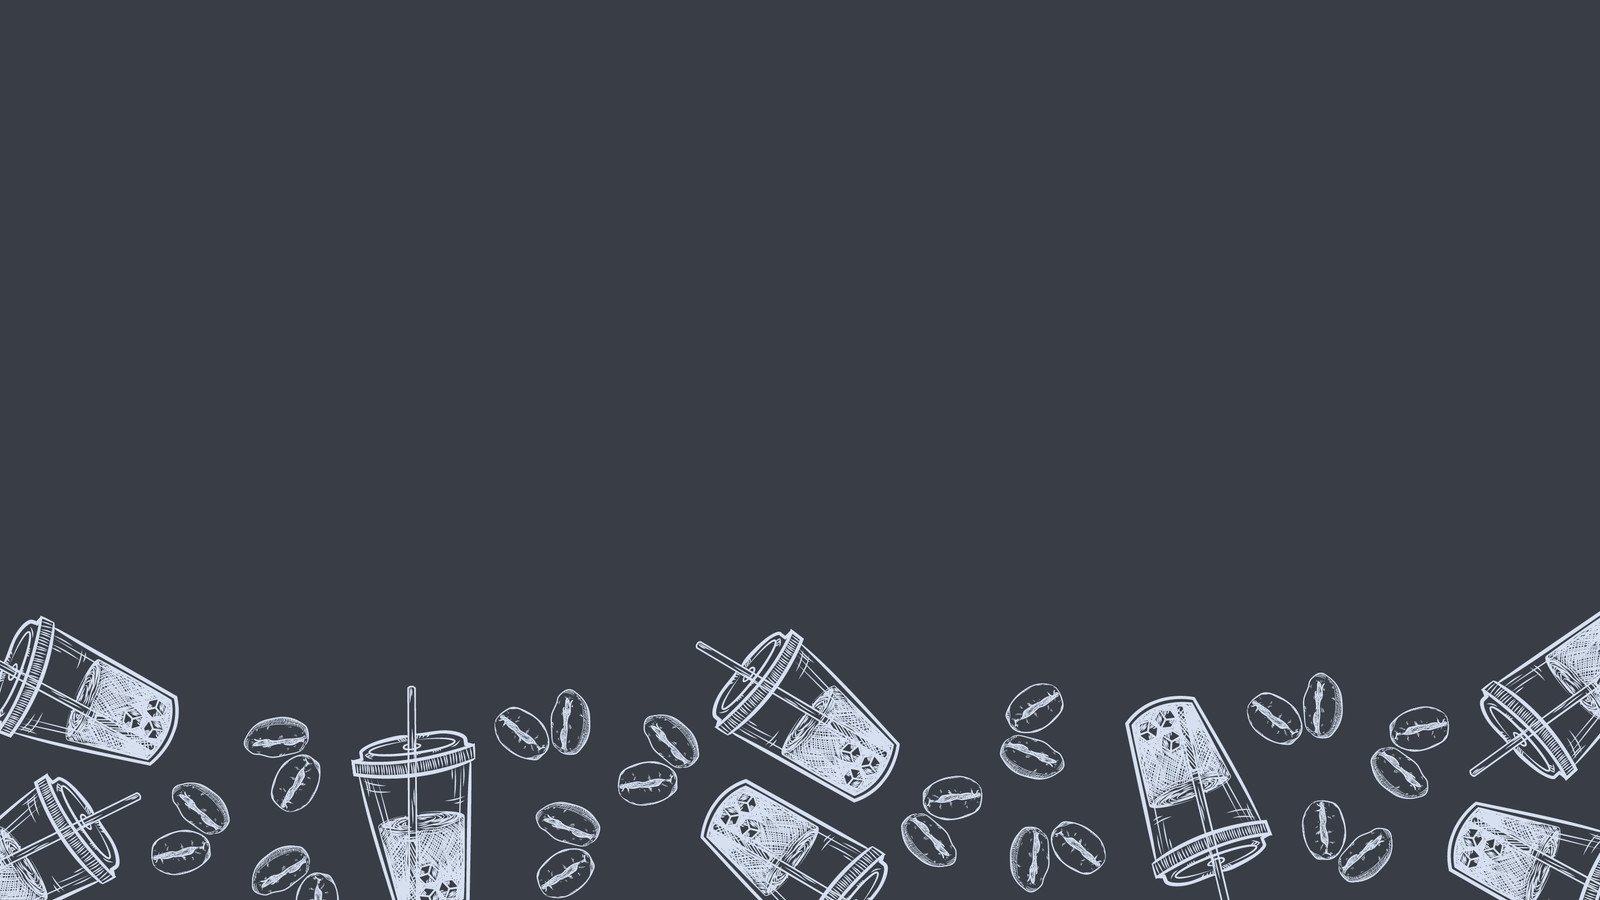 A chalkboard background with coffee cups and coffee beans - Coffee